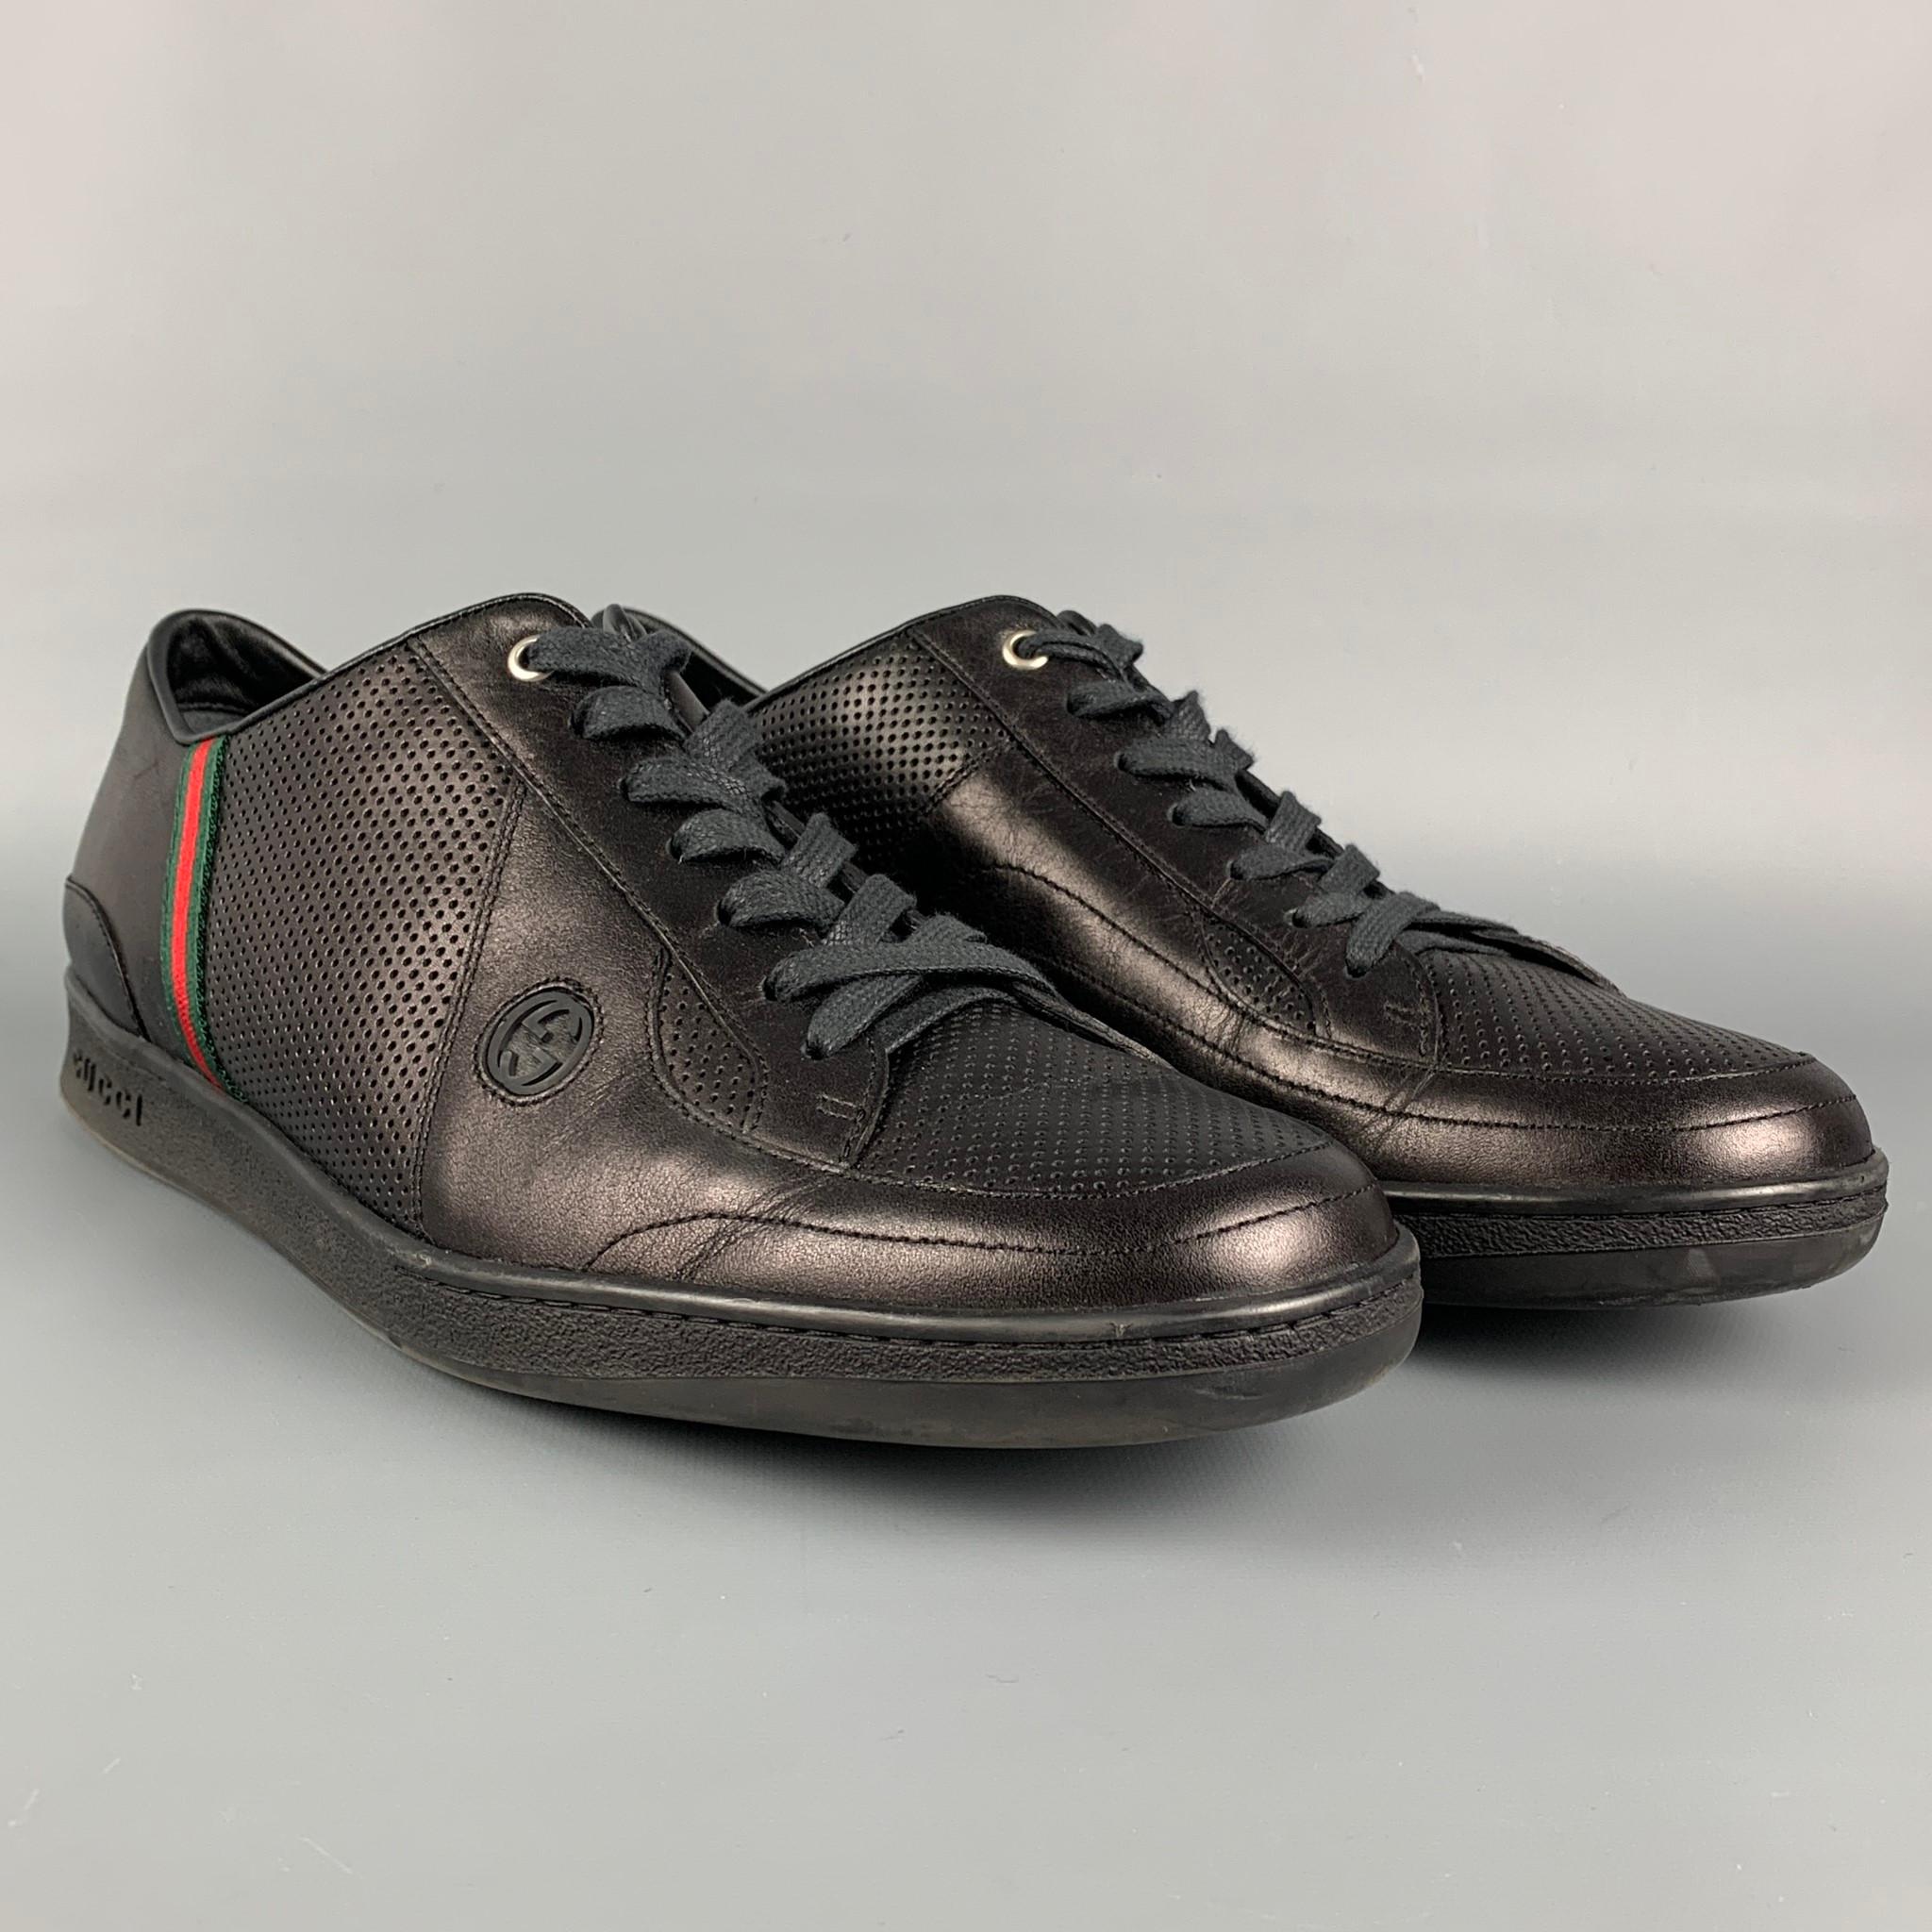 GUCCI sneakers comes in a black perforated leather featuring a low top style, signature stripe trim, and a lace up closure. Includes box. Made in Italy. 

Very Good Pre-Owned Condition.
Marked: 170573 12 G

Outsole: 12.5 in. x 4.25 in. 